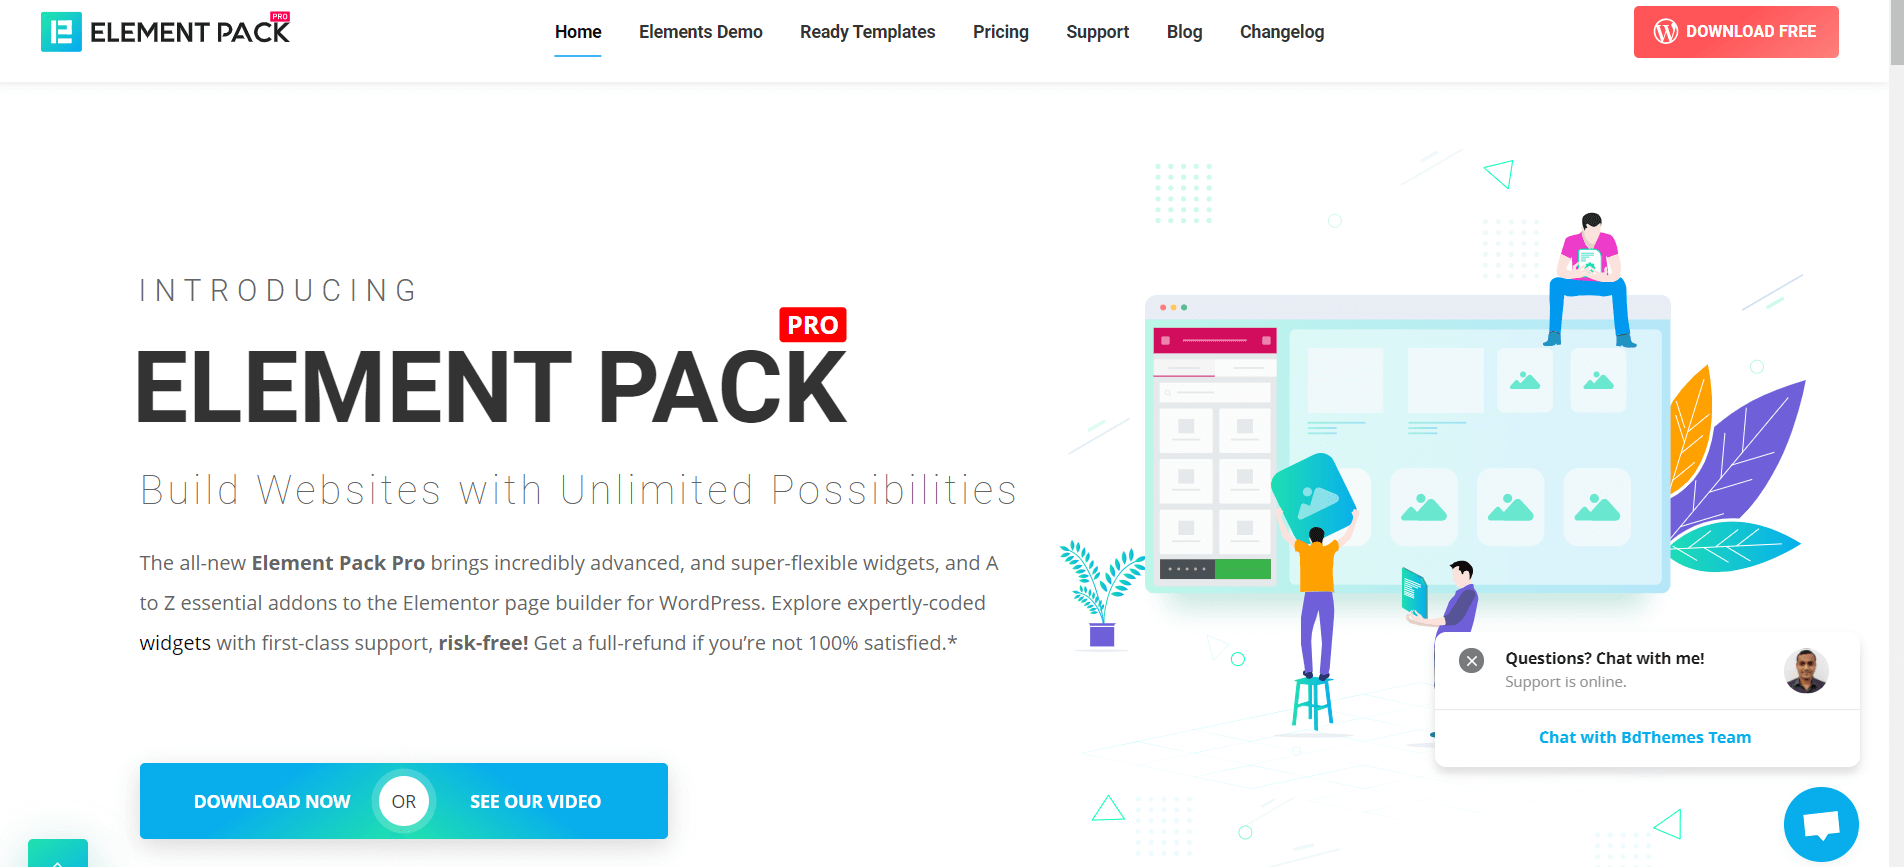 ELEMENT PACK: Build Websites with Unlimited Possibilities